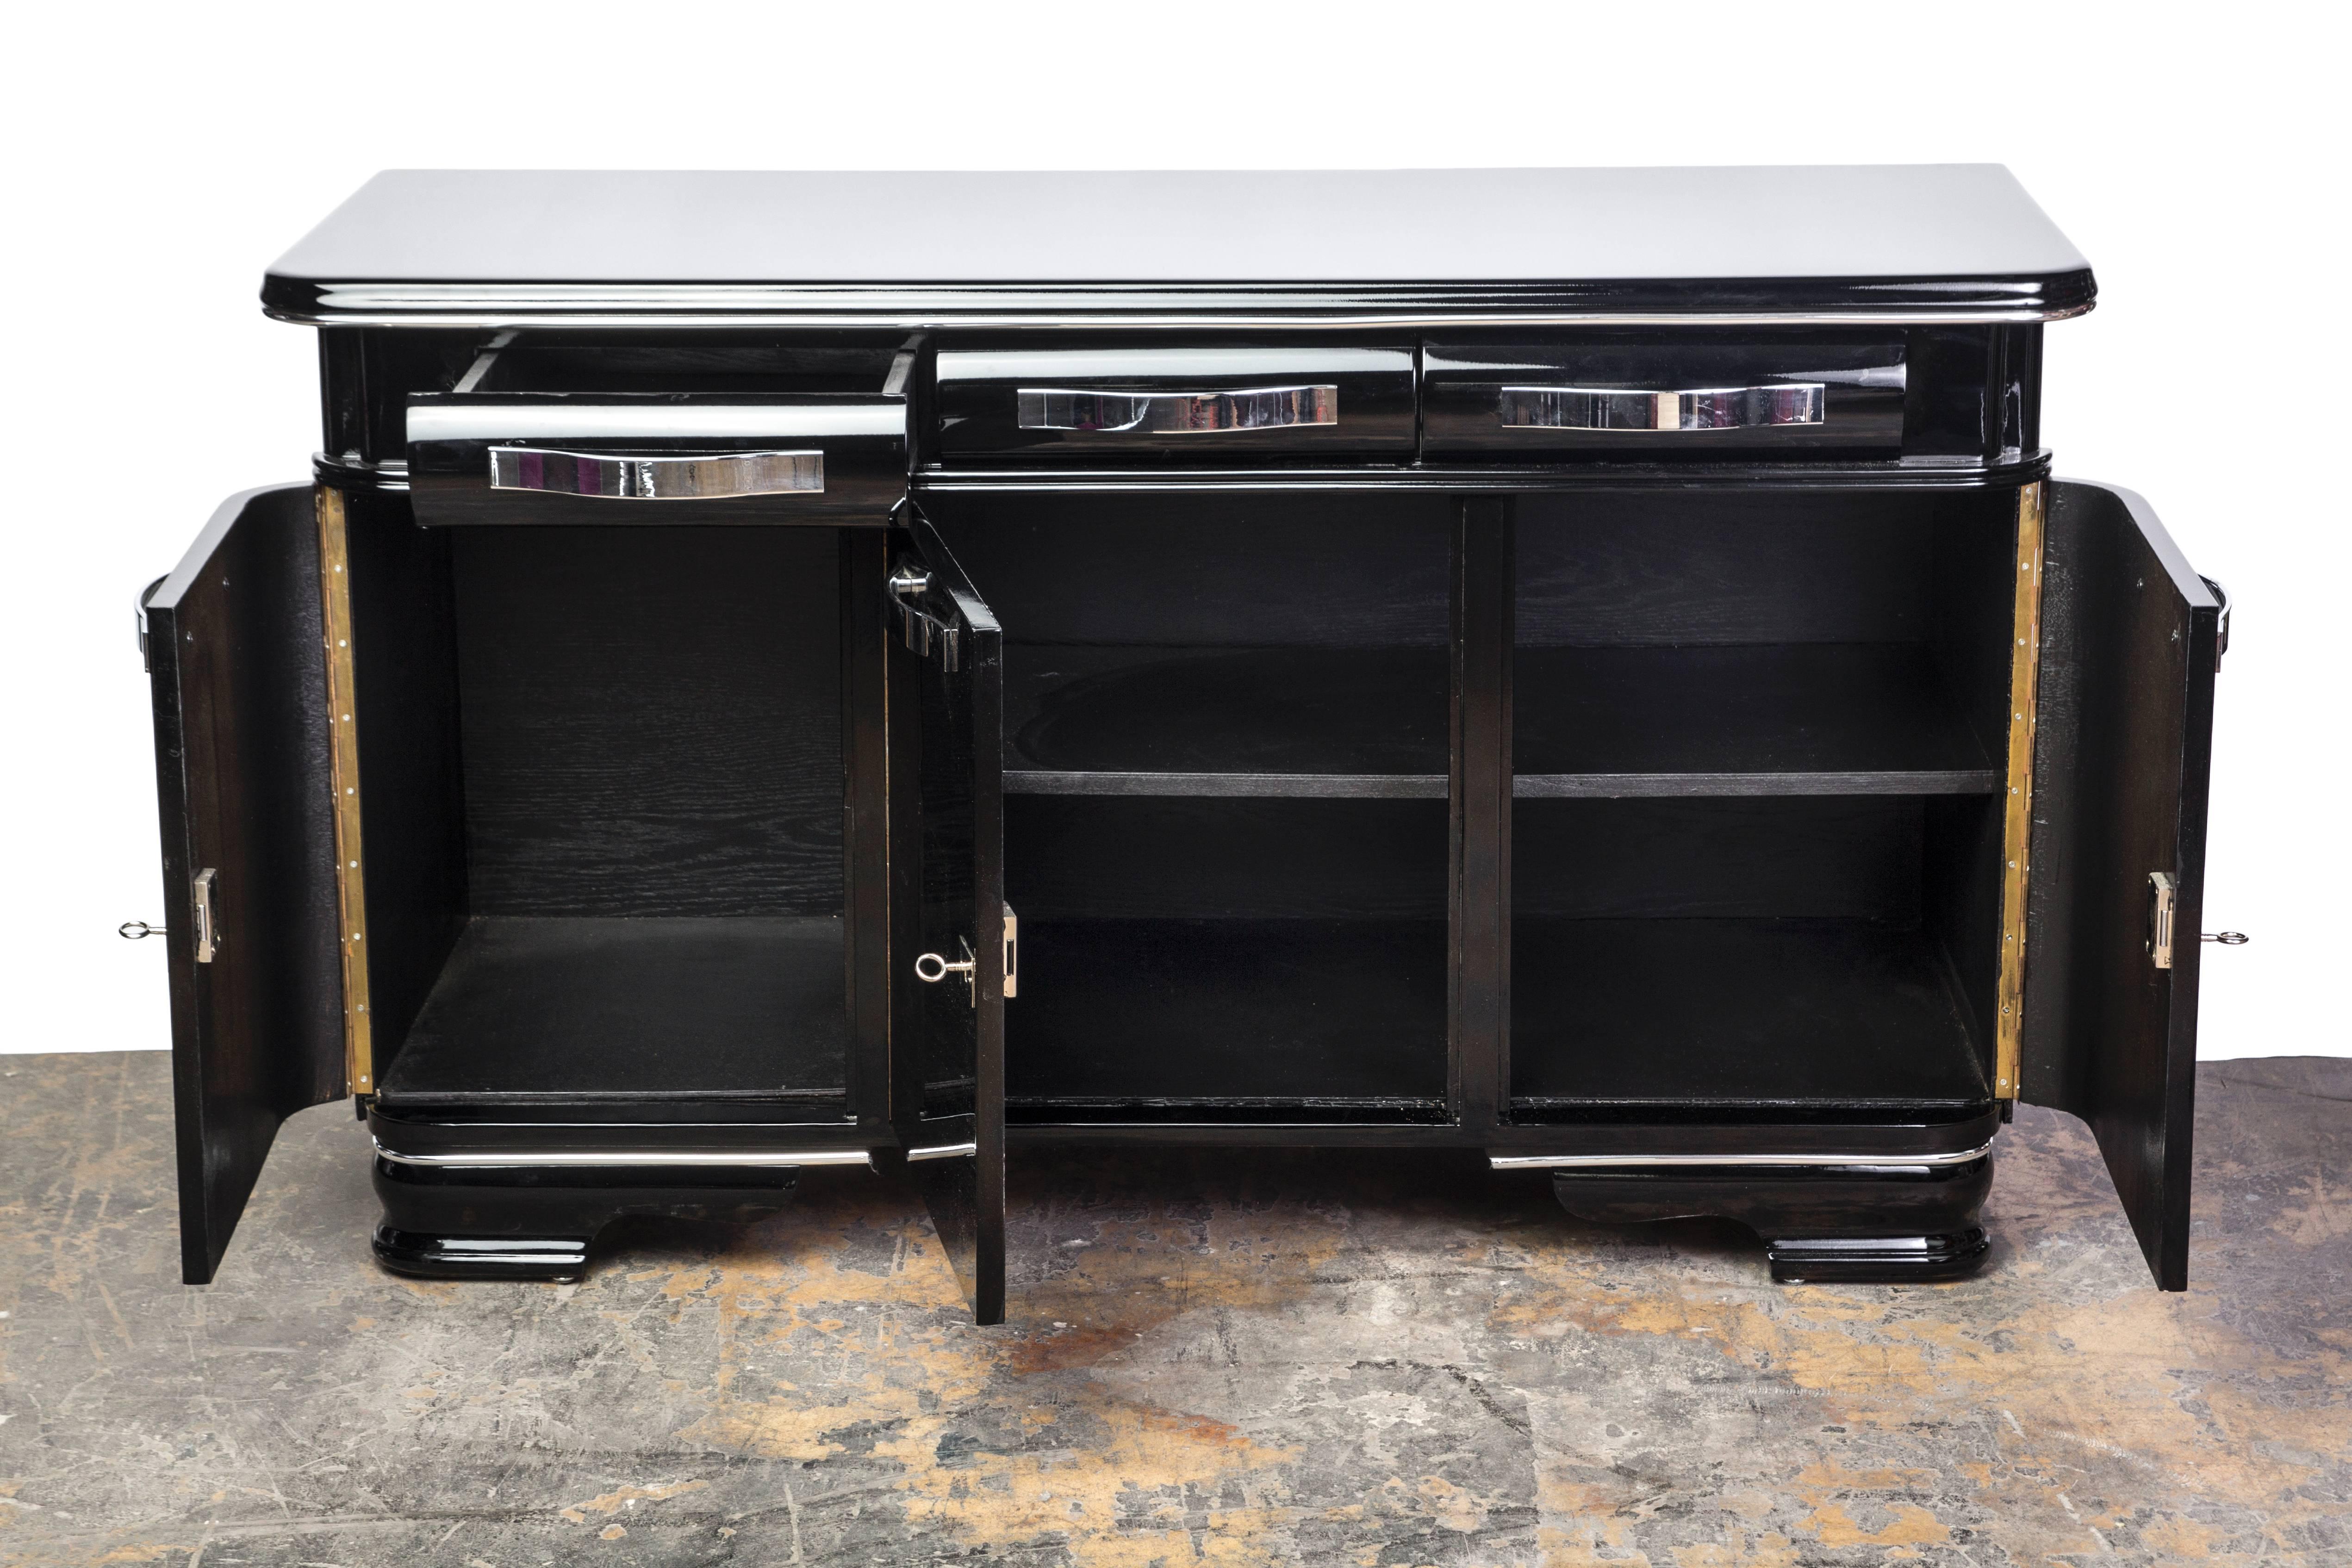 This unique sideboard from Mons features a streamline design with plenty of storage and striking beauty. The piece has been fully refinished in a black piano-lacquer exterior and matte black interior. It has three swing doors, chromed hardware and